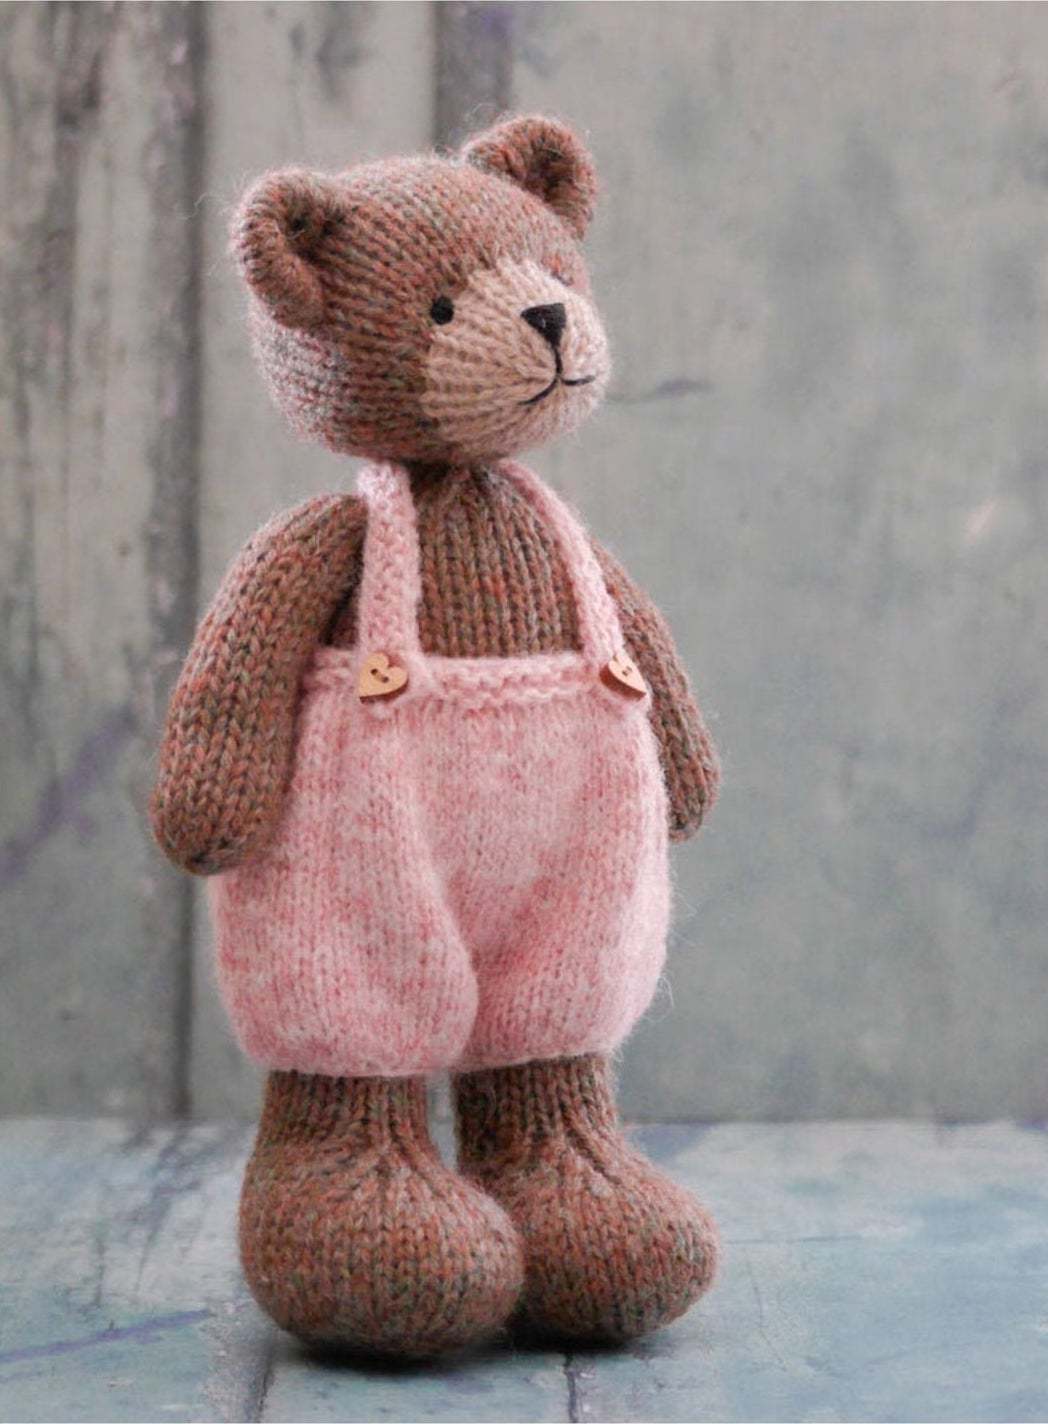 Make a cute teddy bear with our free knitting pattern